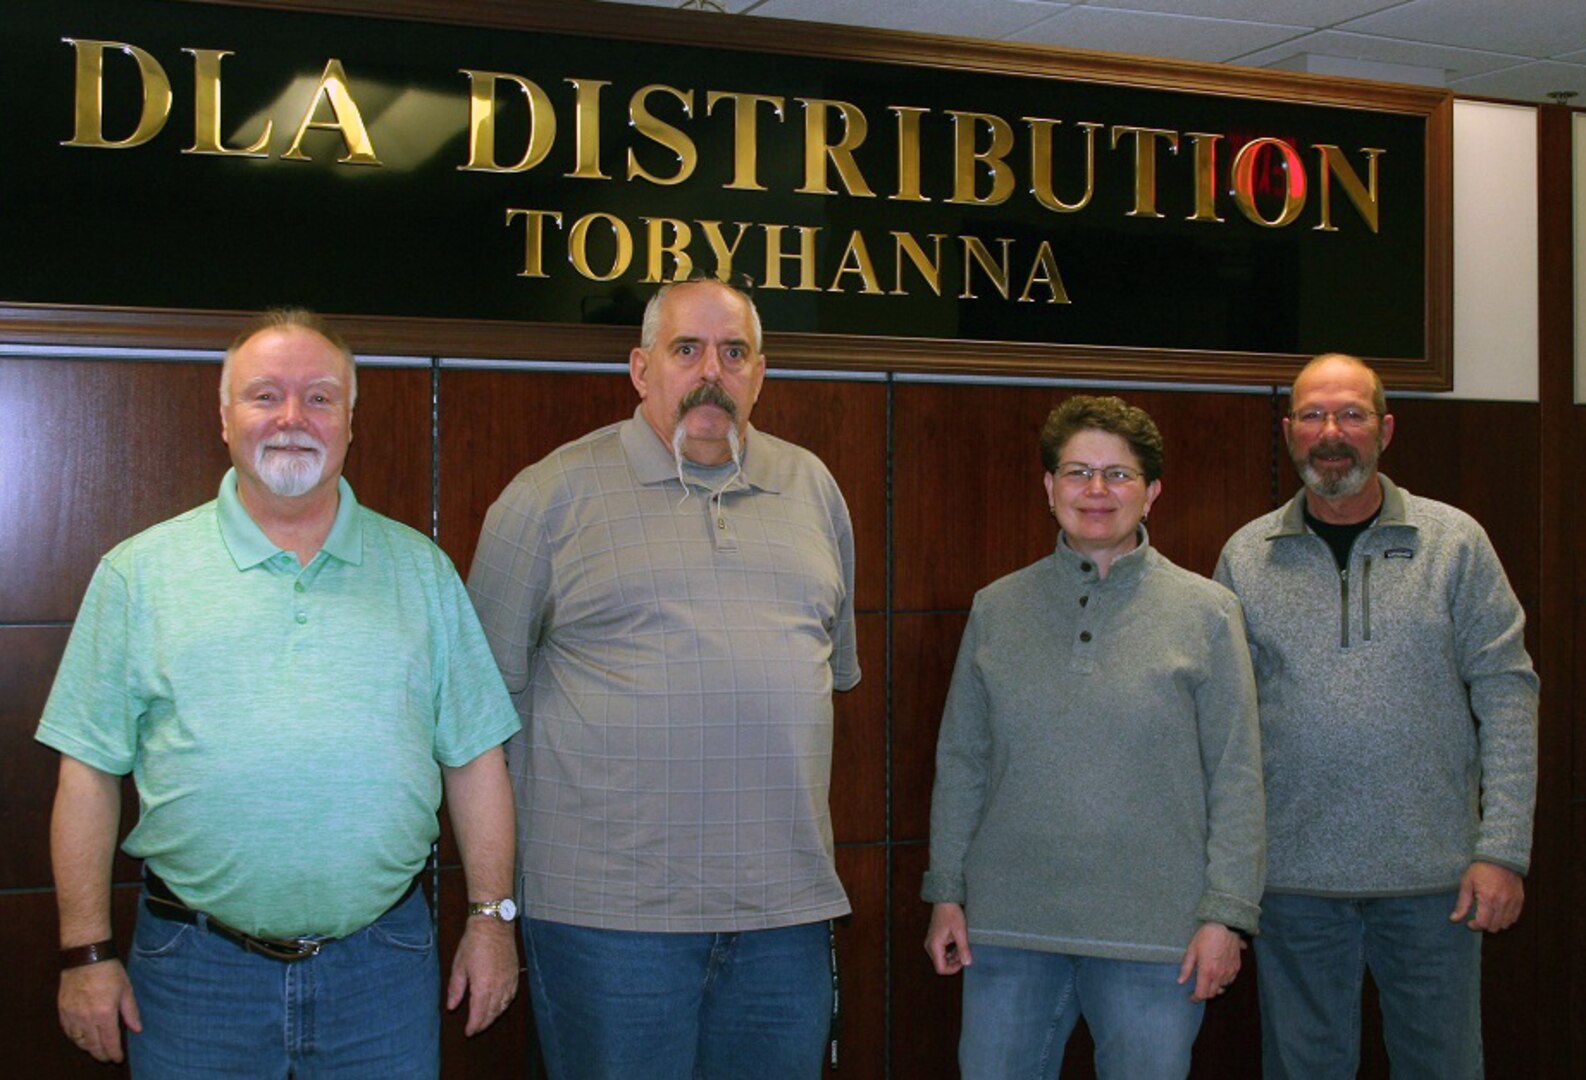 DLA Distribution Tobyhanna earns the Andrew L. Leitzel Annual Contract Quality Assurance Program Commendable Service Award (Team)